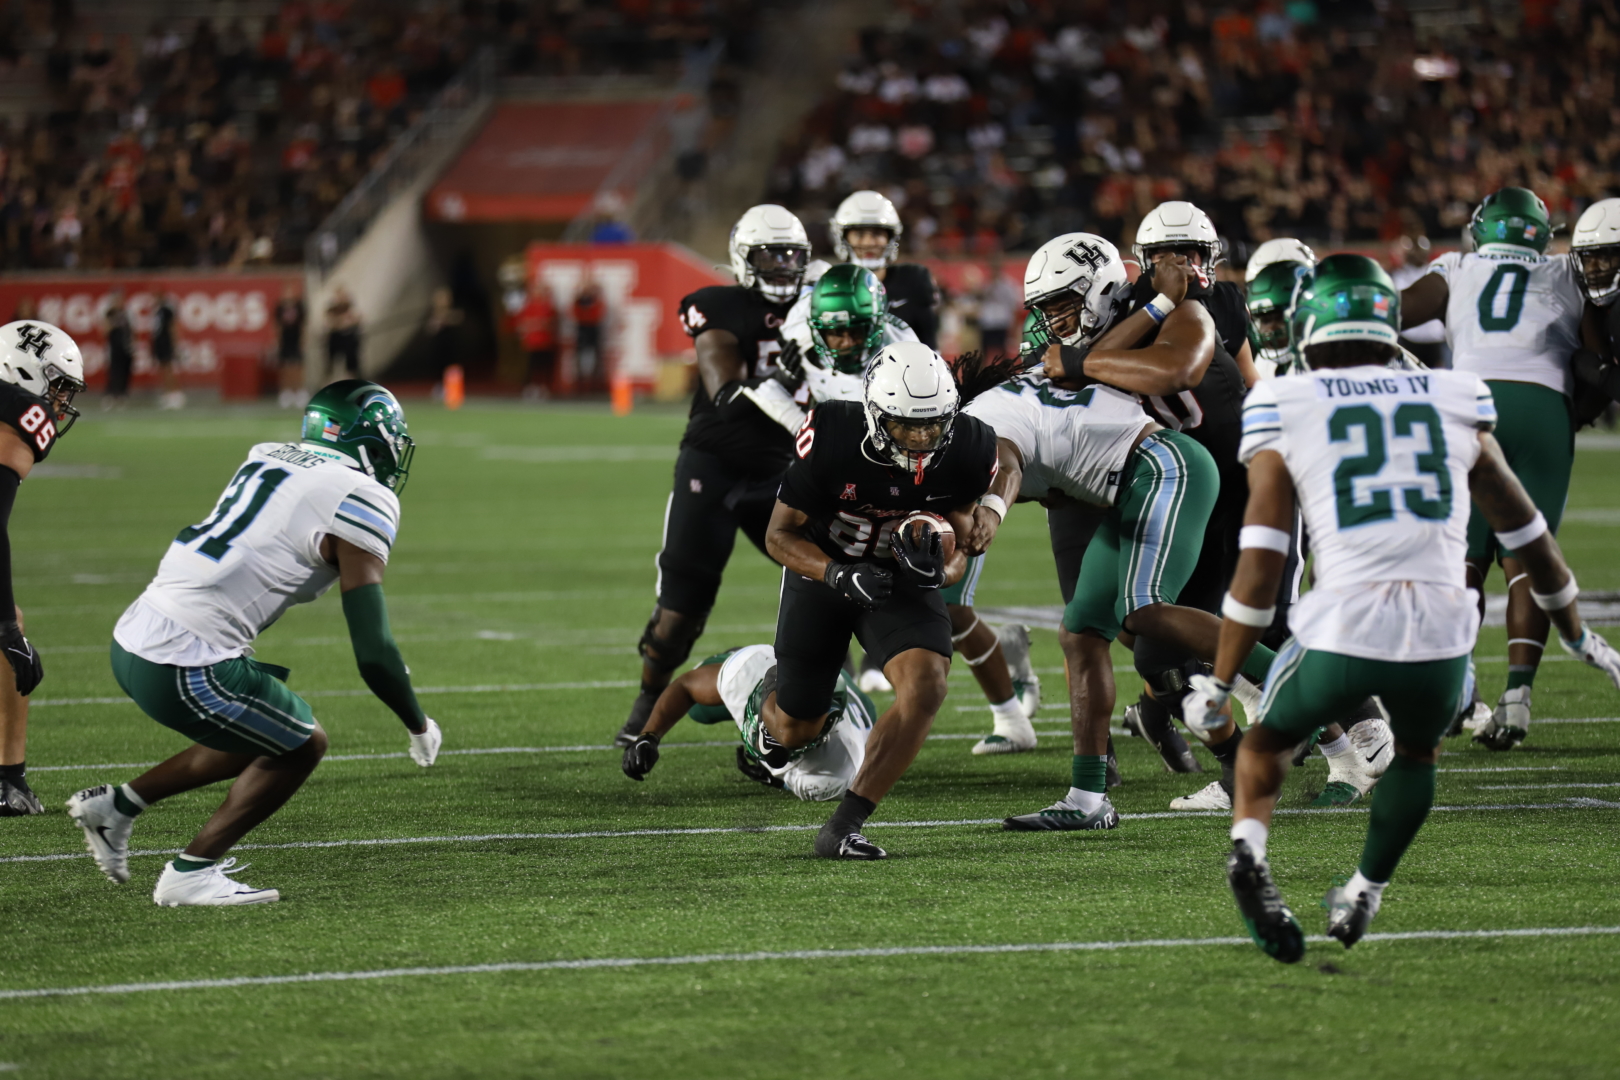 Freshman running back Brandon Campbell rushed for his third touchdown of the season in the fourth quarter of UH's loss to Tulane on Friday night at TDECU Stadium. | James Mueller/The Cougar